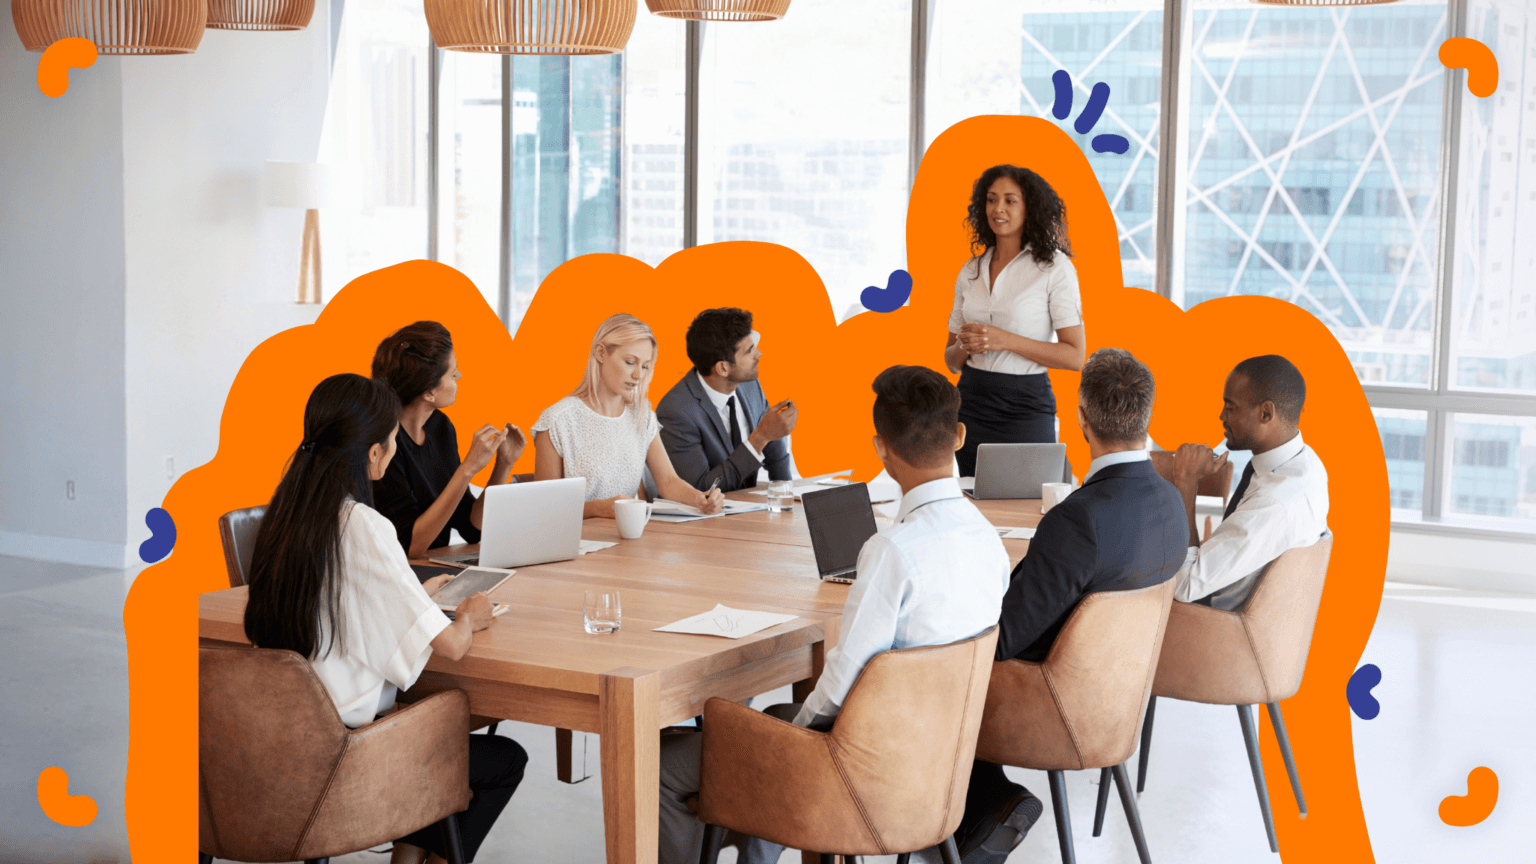 What is a level 10 meeting